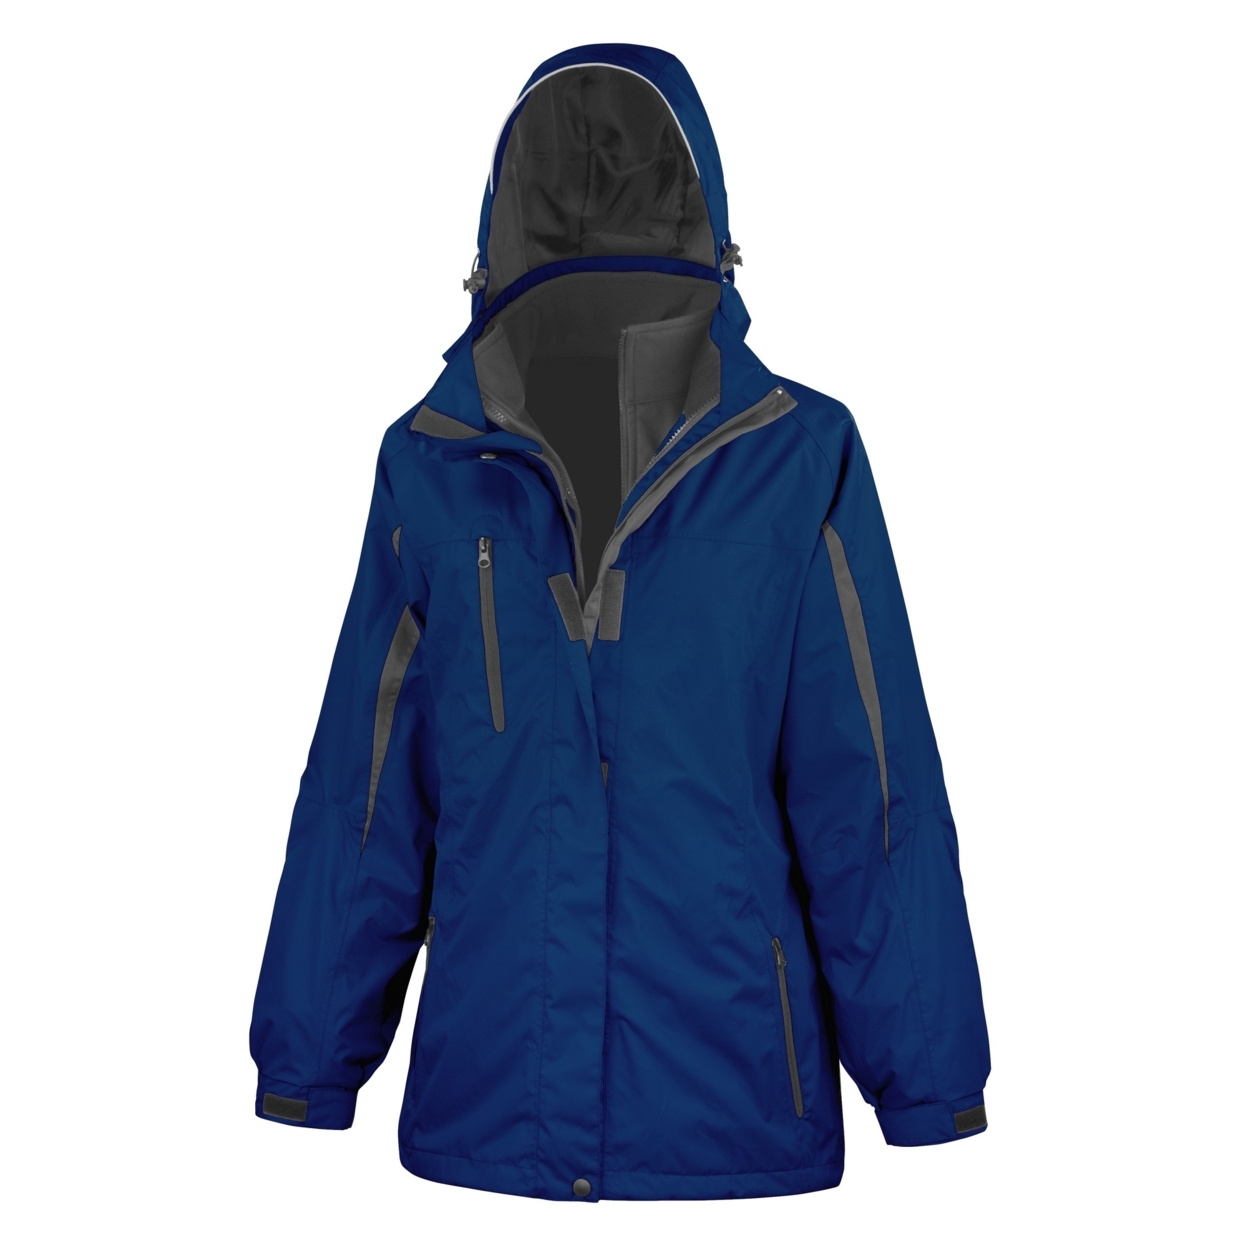 Result Womens 3 In 1 Softshell Journey Jacket With Hood - image 3 of 5